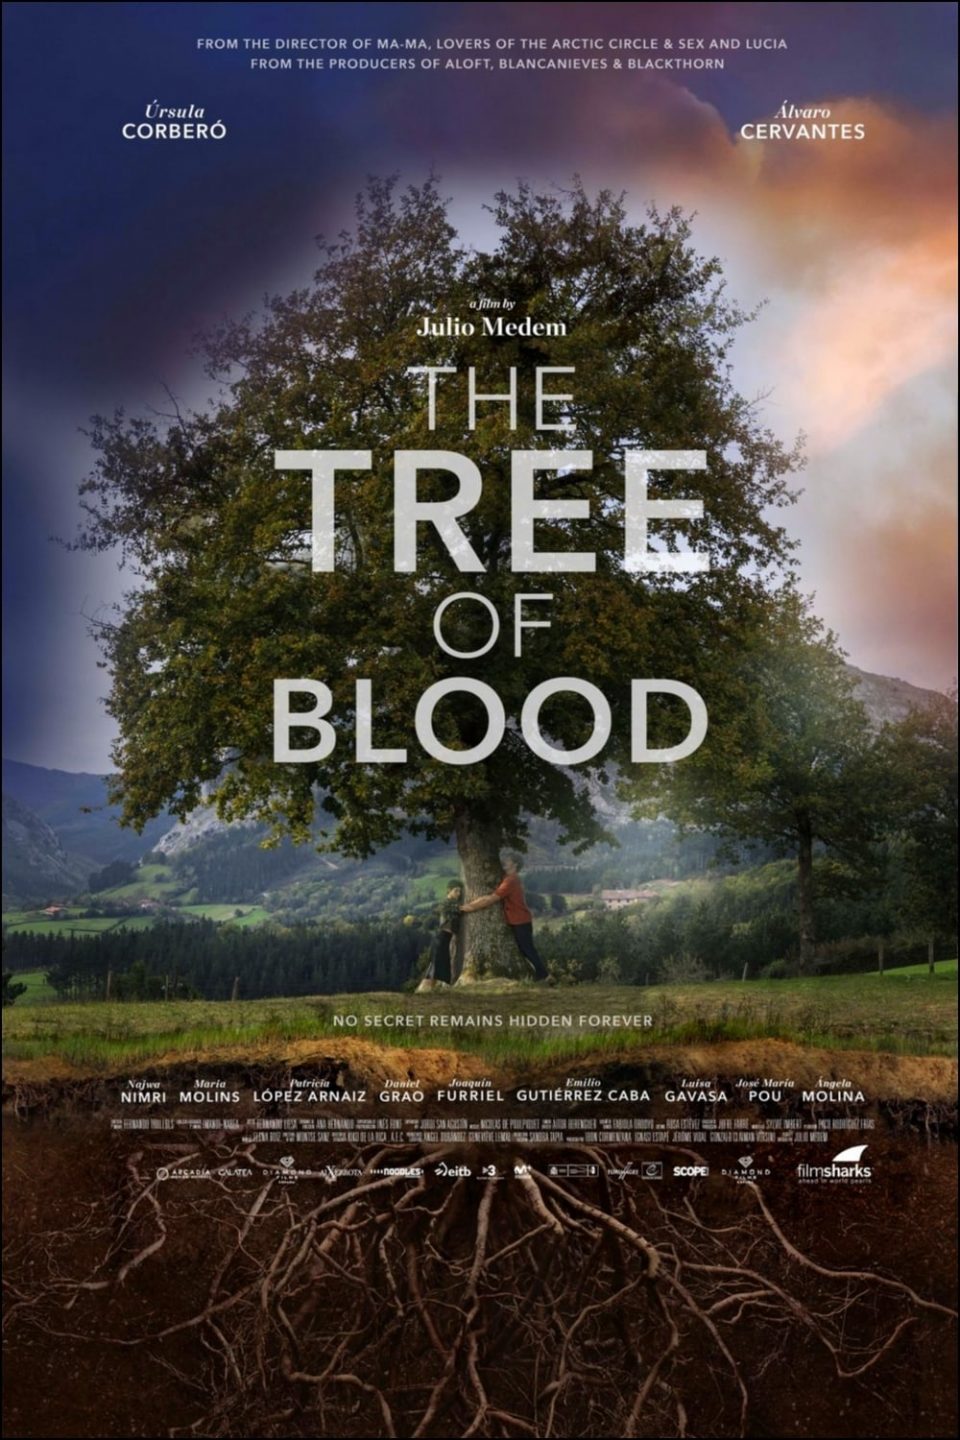 Poster for the movie "The Tree of Blood"